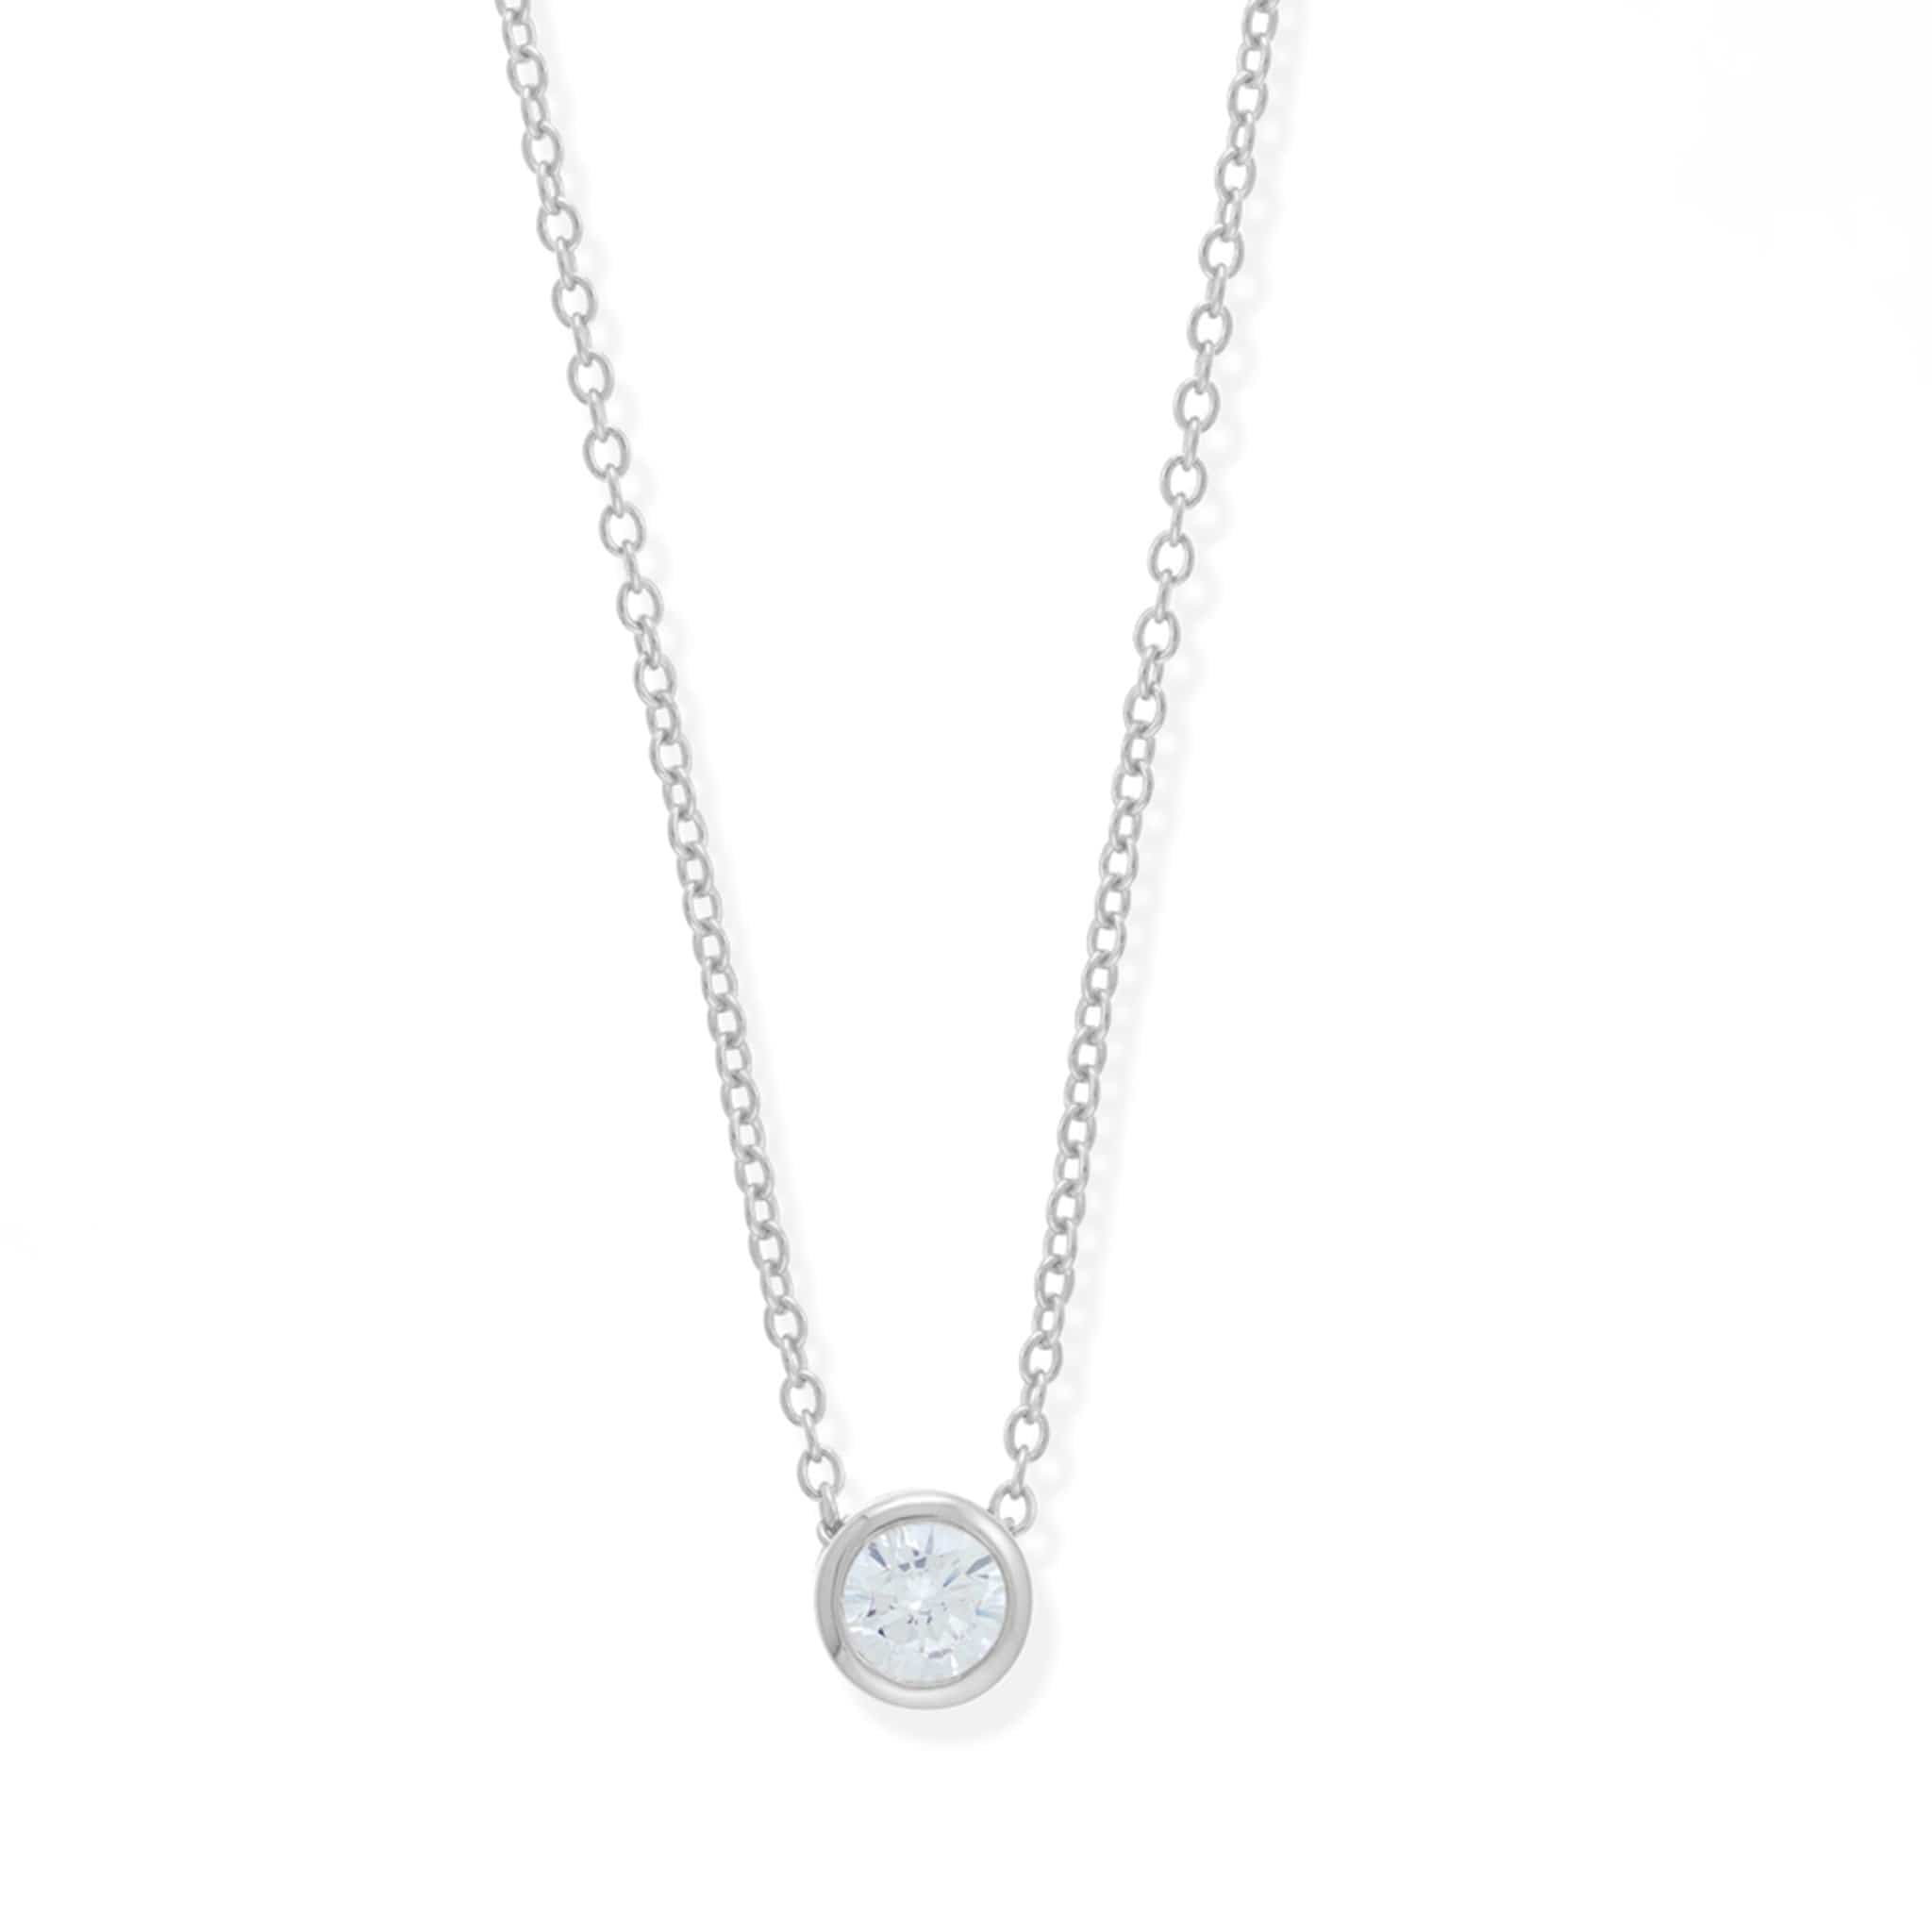 Boma Jewelry Necklaces Sterling Silver Belle CZ Pendant Necklace